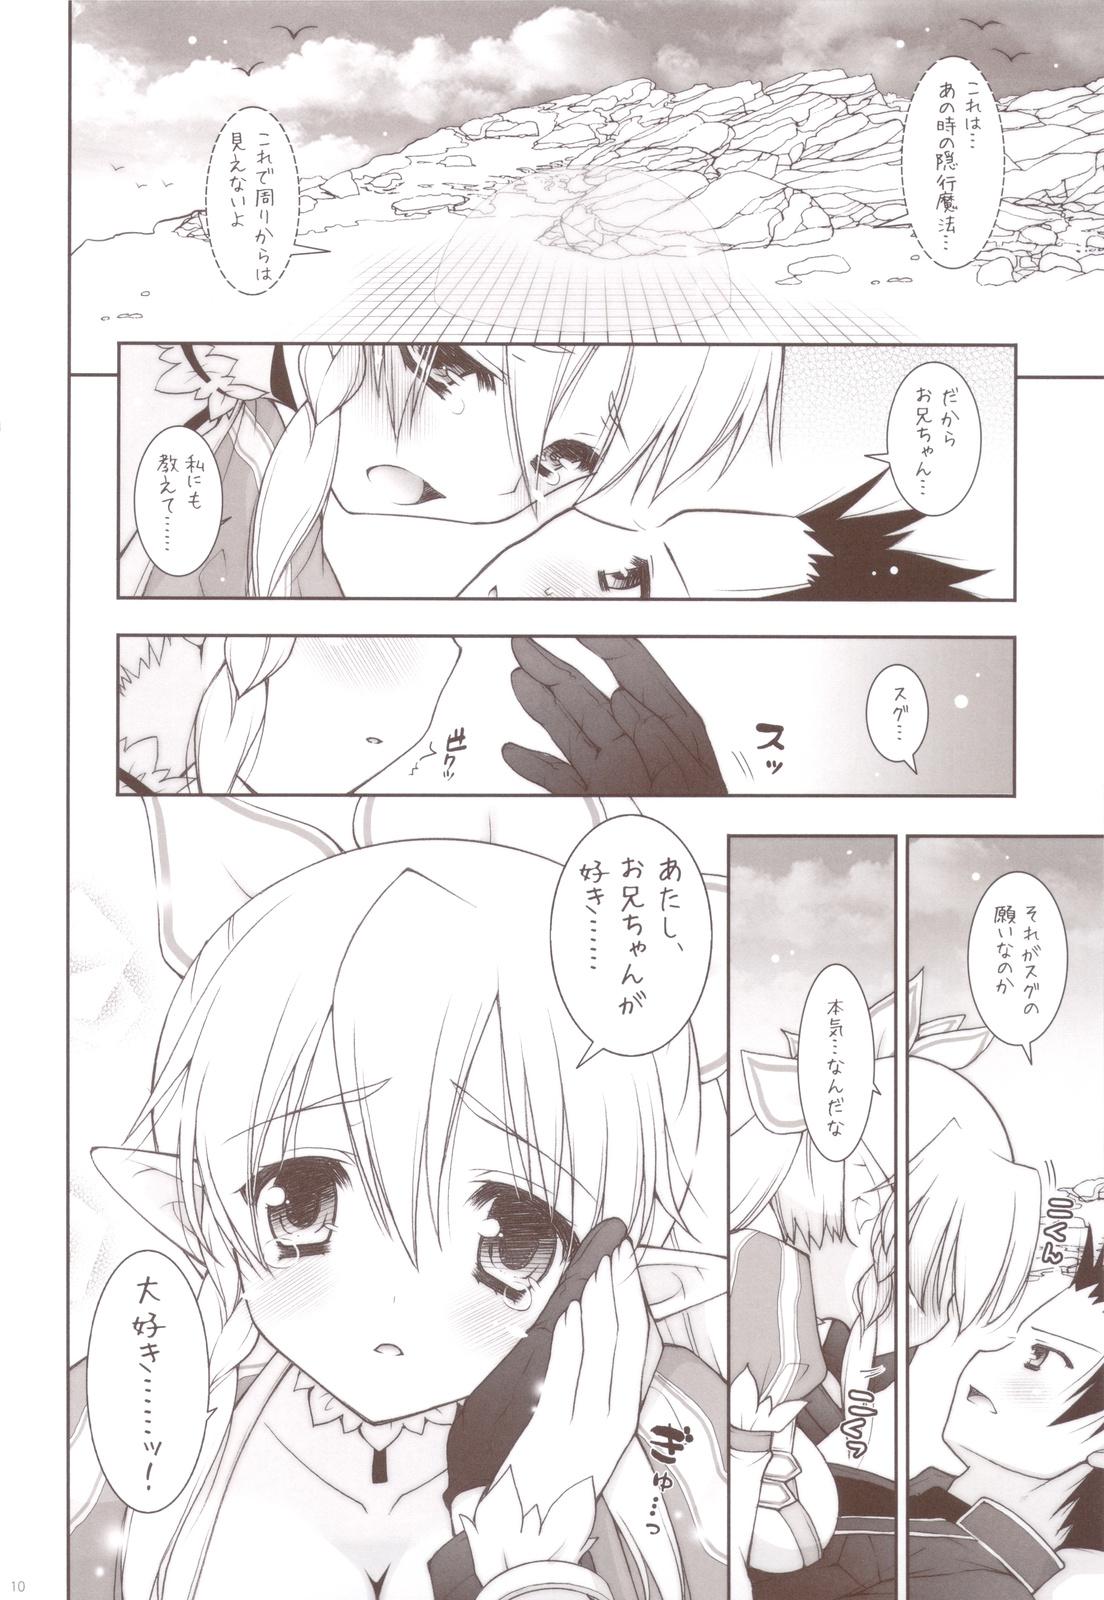 Lima Sex And Oppai + Omake Bon - Sword art online Muscle - Page 9